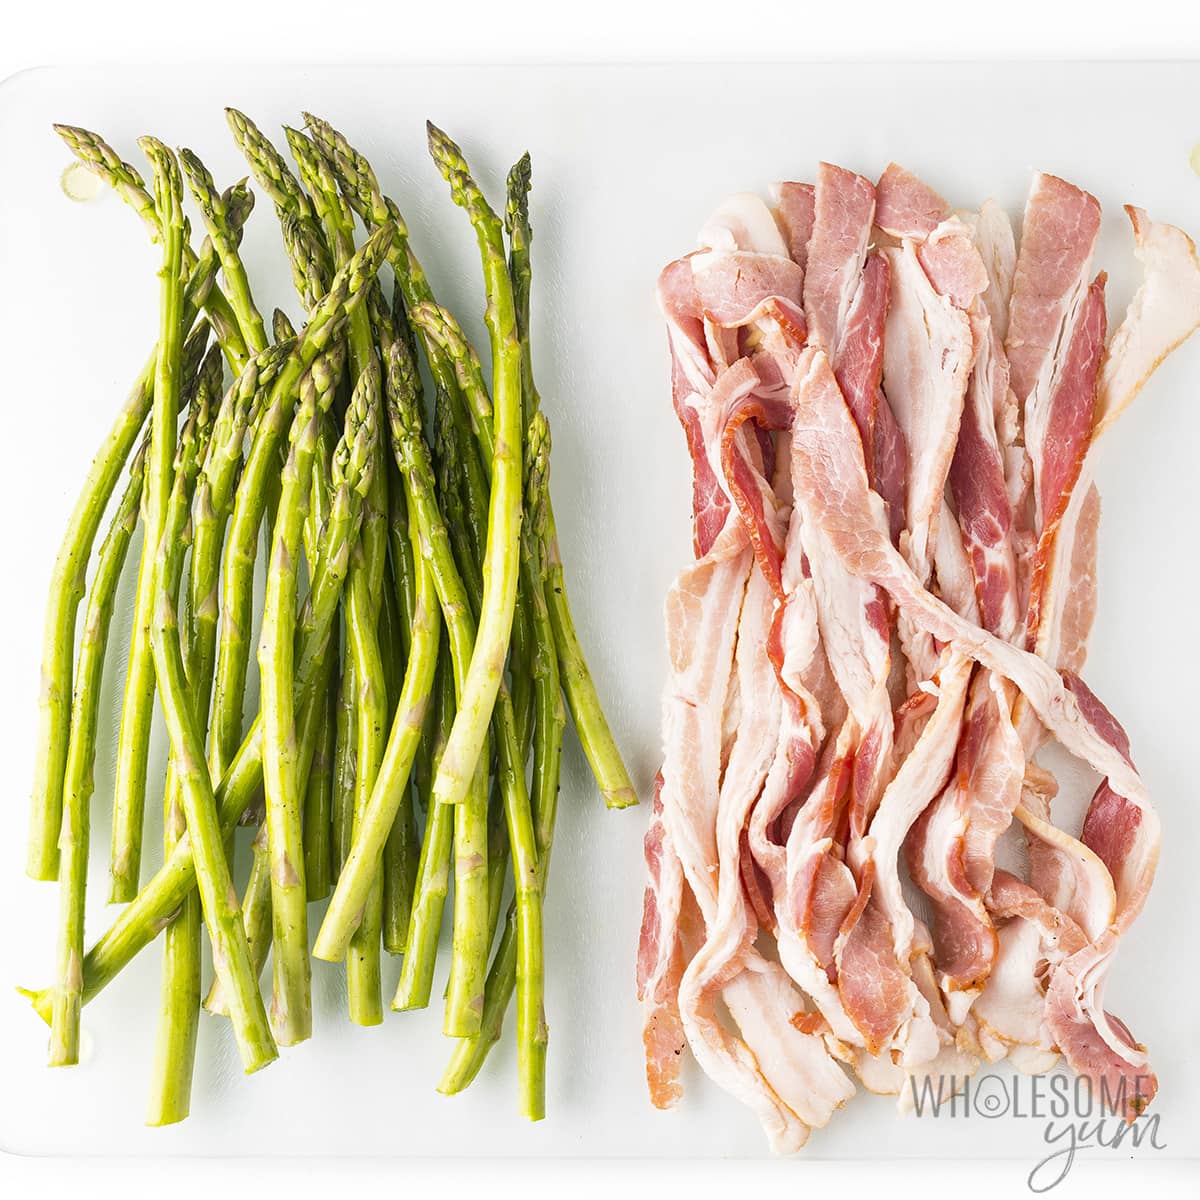 Trimmed asparagus next to slices of bacon.